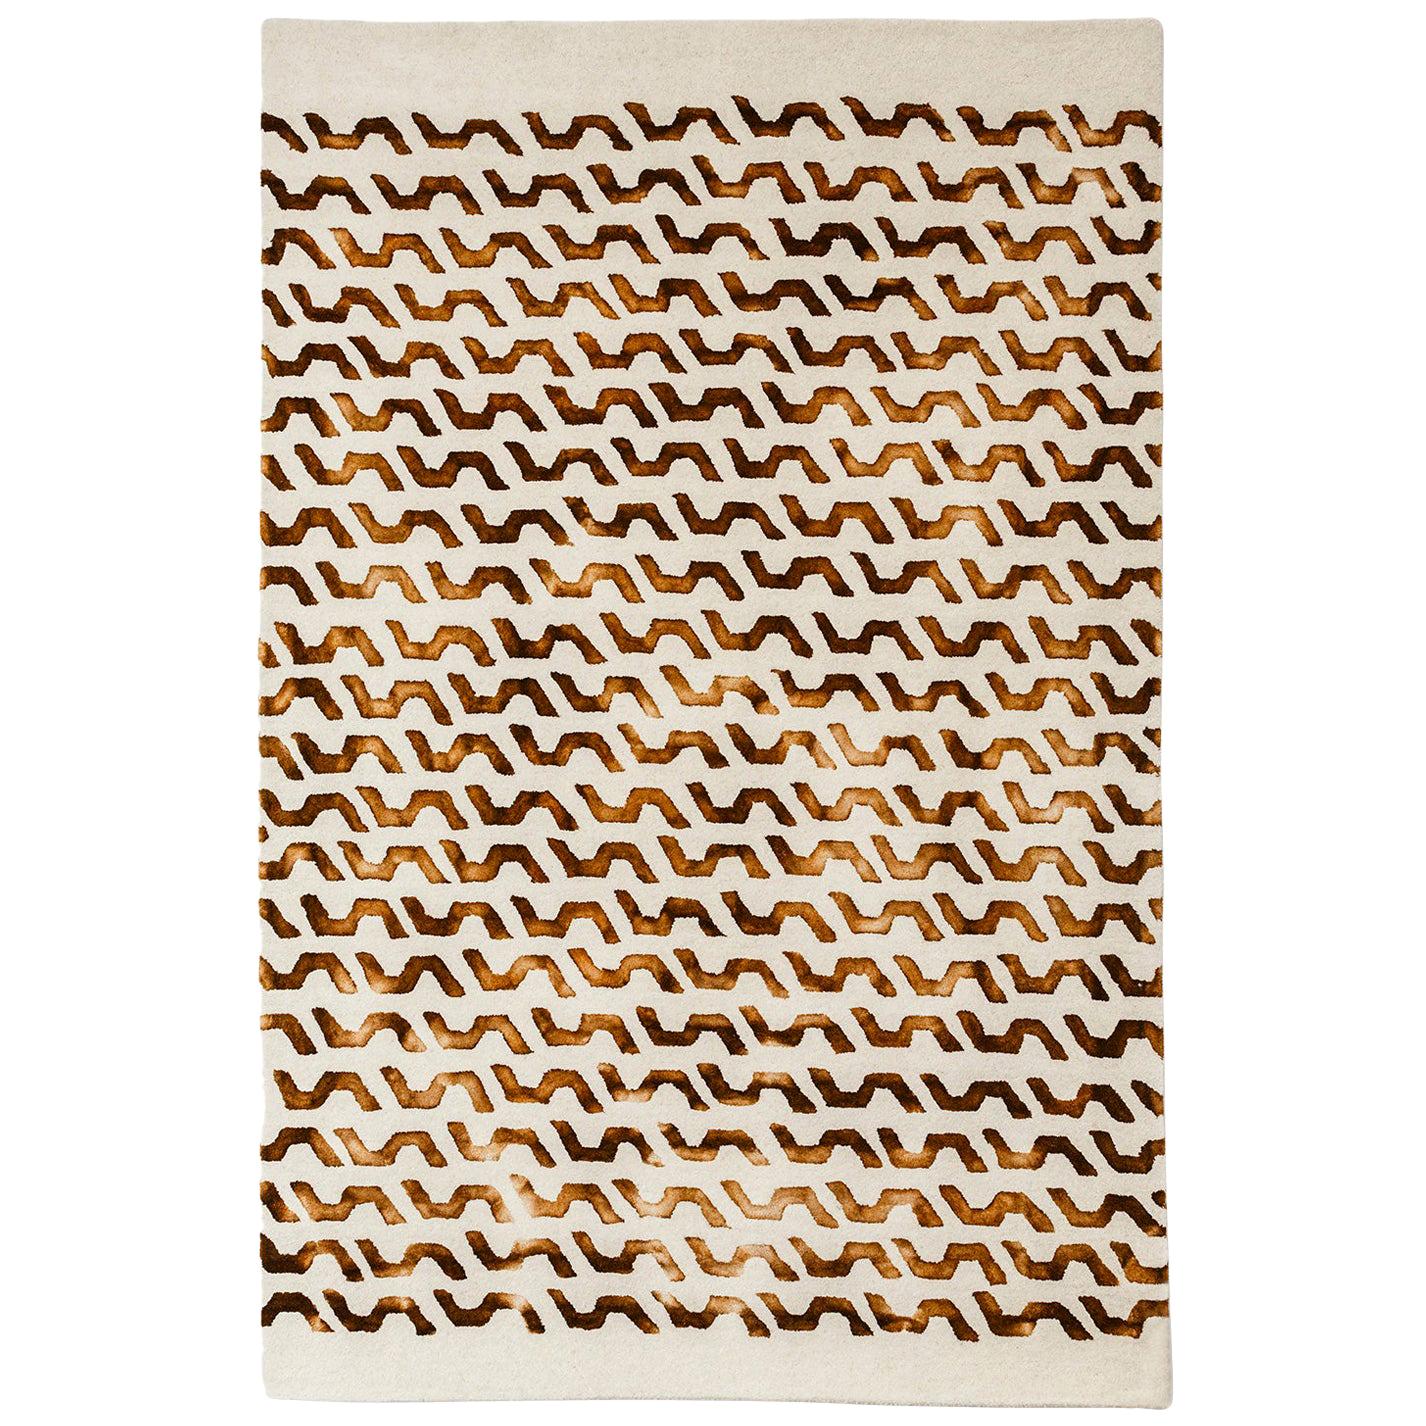 Contemporary Patterned New Zealand Wool Rug by Deanna Comellini 200x300 cm